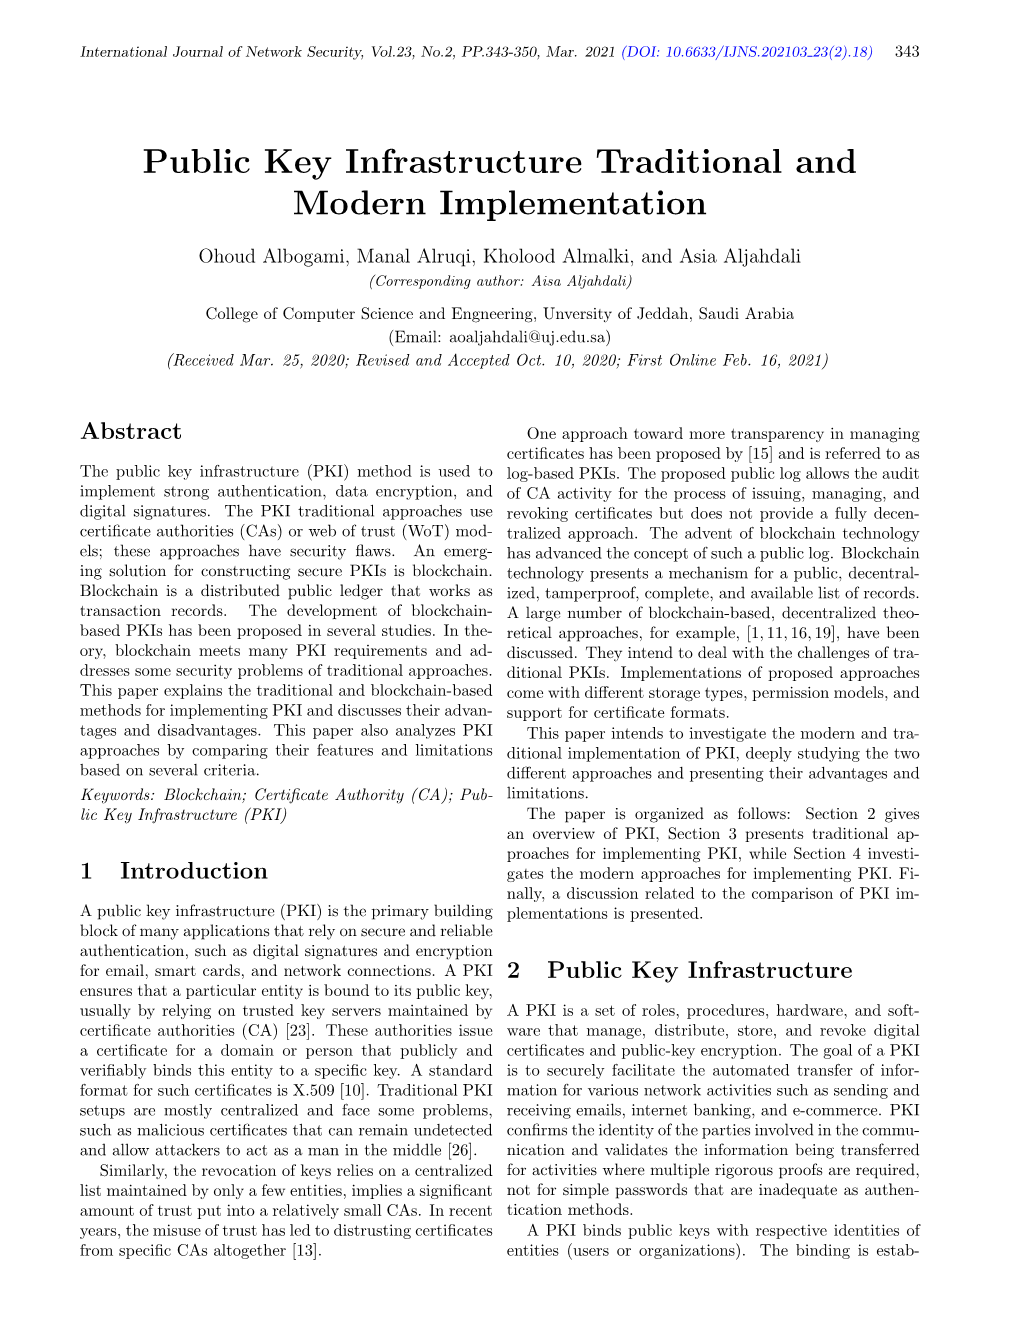 Public Key Infrastructure Traditional and Modern Implementation